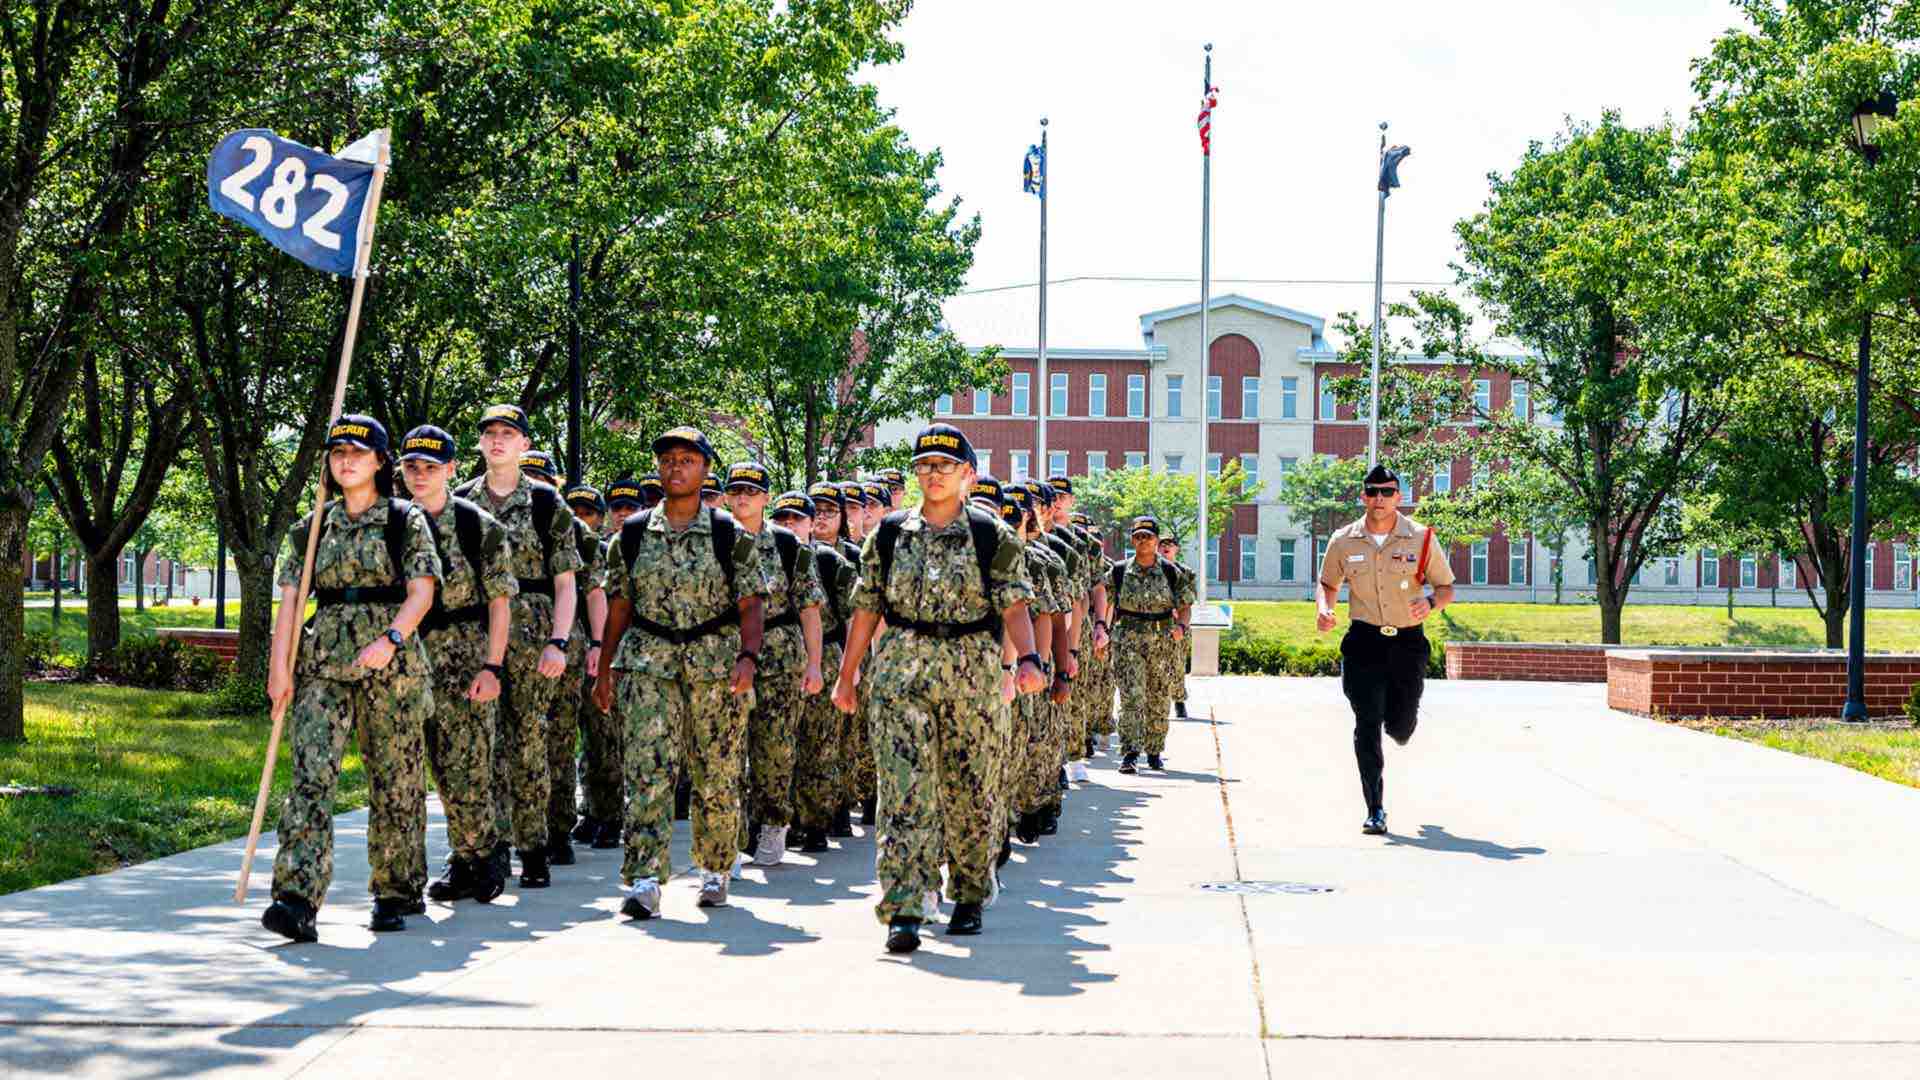 Navy Recruits Learn How to March at Recruit Training Command, or Navy Boot Camp, in Great Lakes, IL